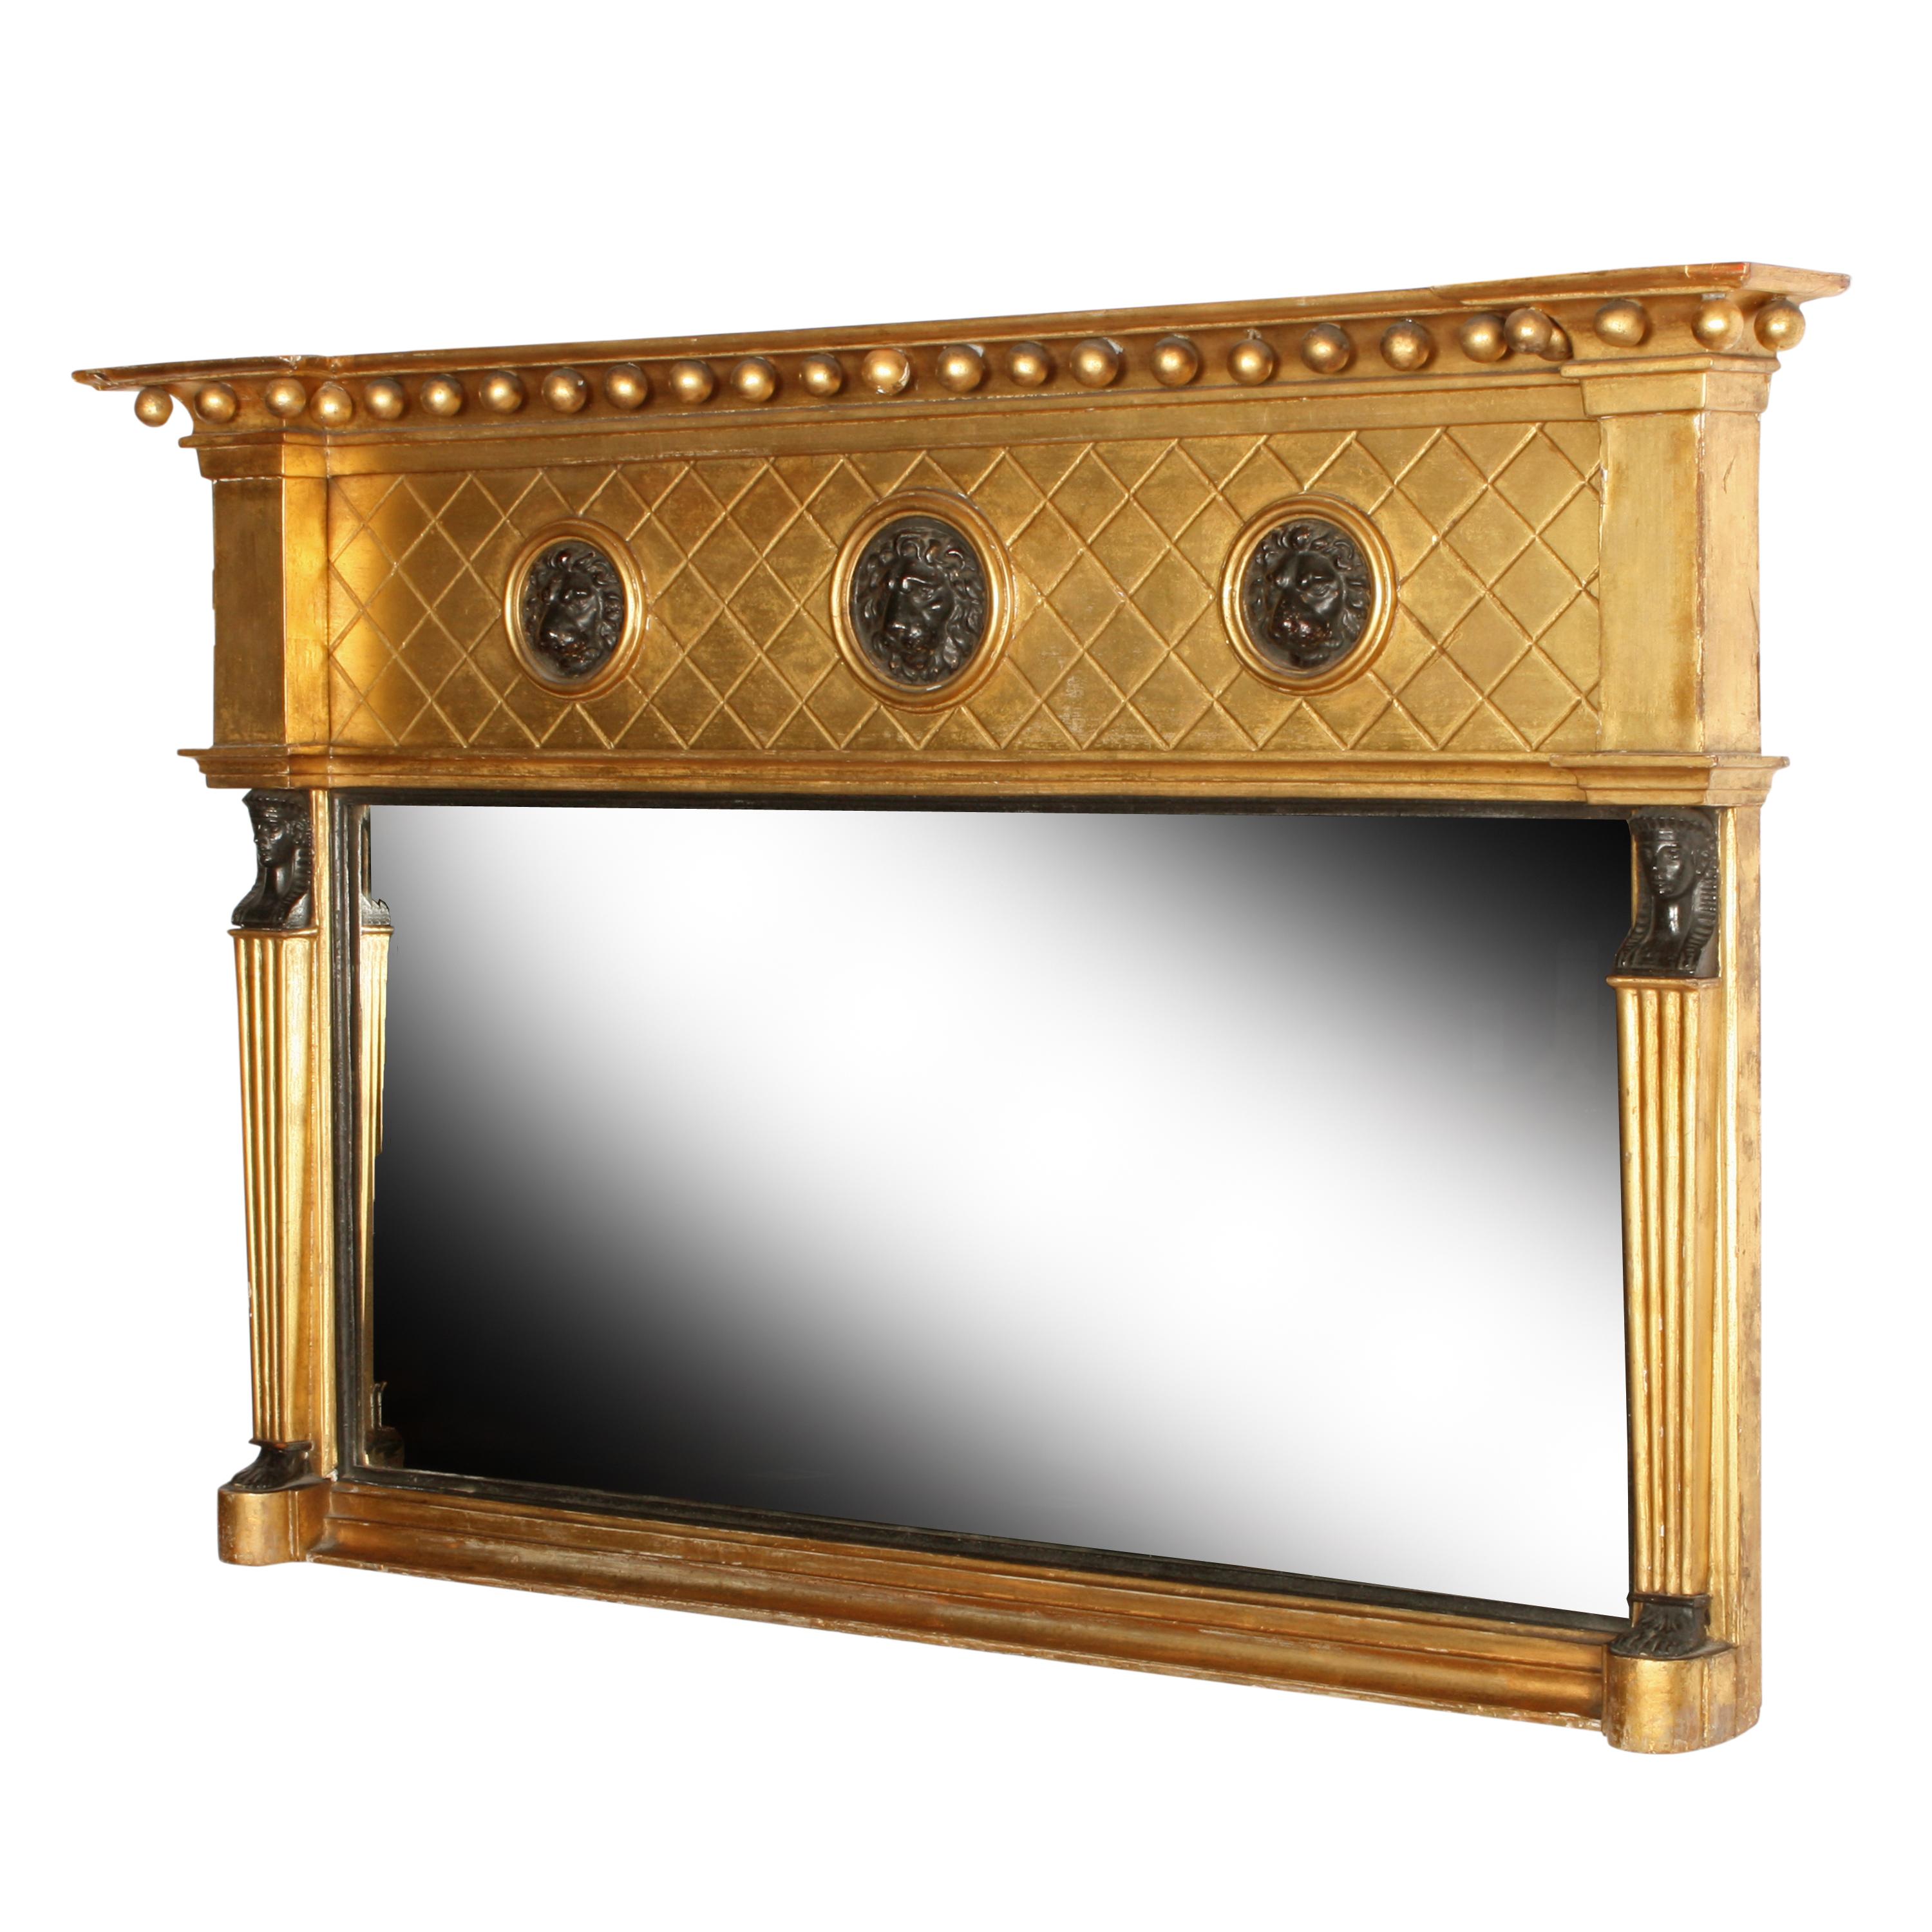 Regency giltwood overmantel mirror.


An early 19th century Regency carved gilt wood and gesso overmantel mirror.

The frame is decorated with three lion masks in the top frieze and Egyptian figures flanking the mirror plate.

The mirror has